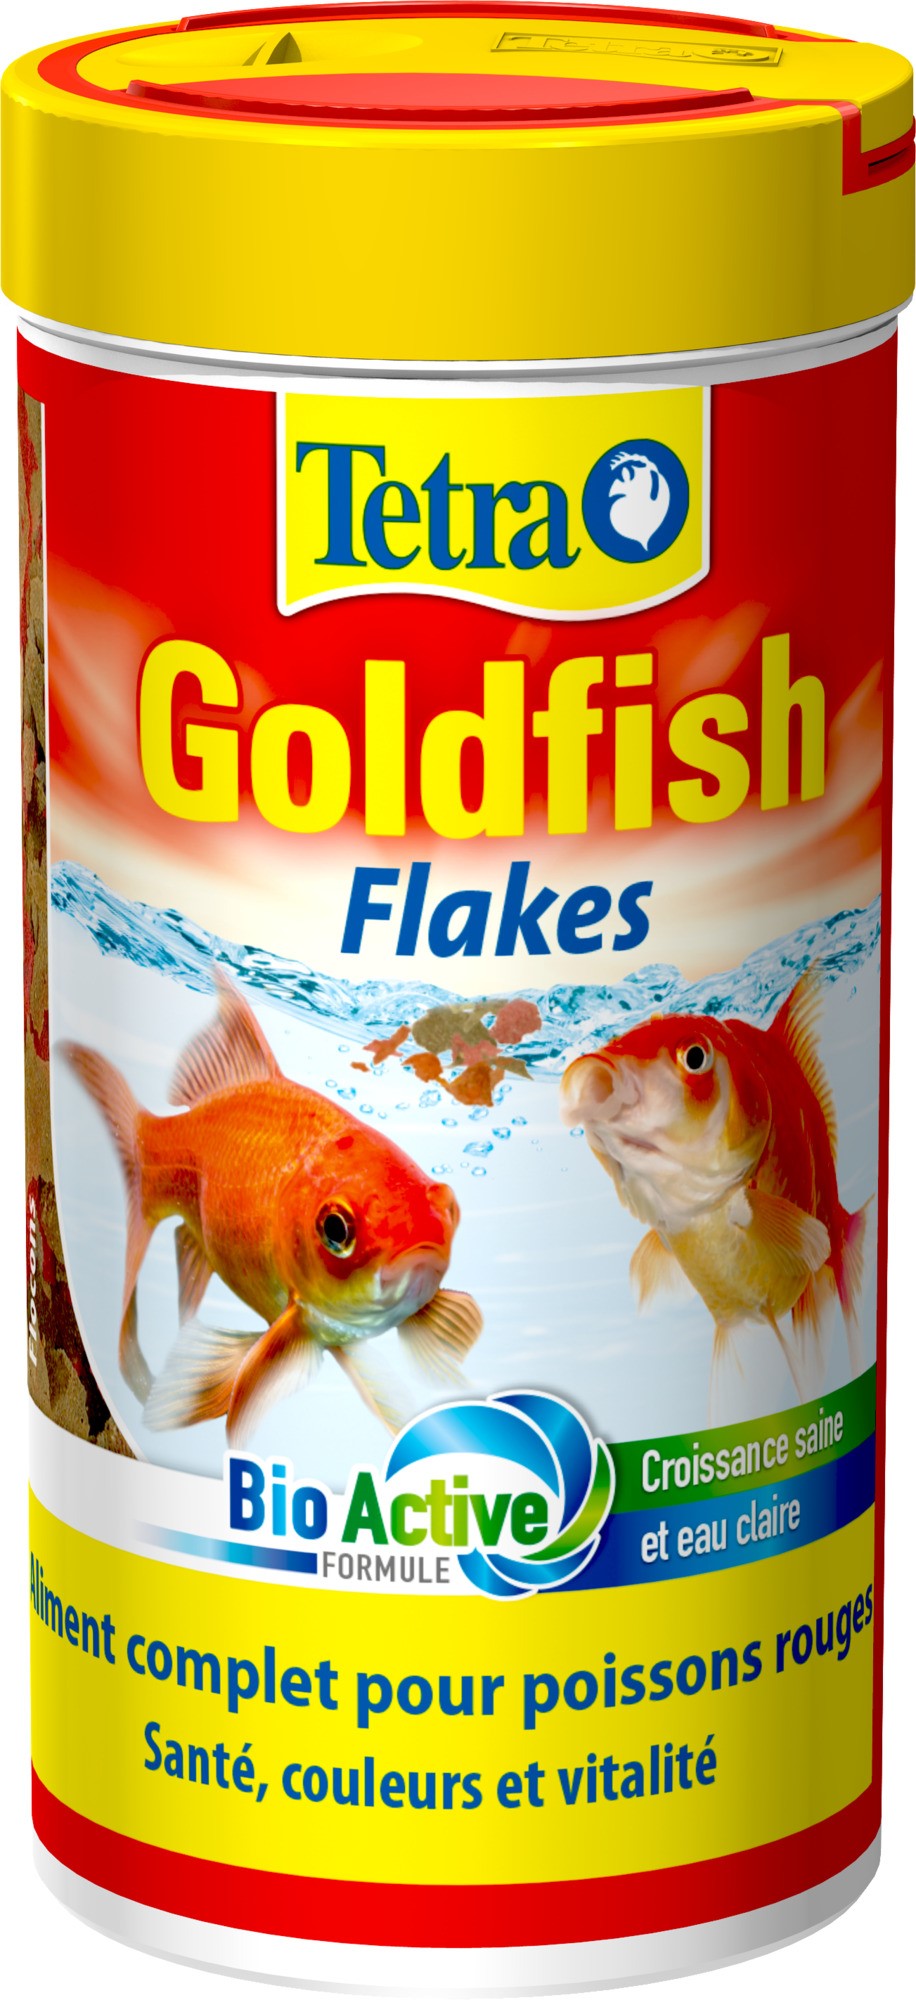 Aliment Complet Poissons Rouges Tetra Goldfish 250ml - TETRA